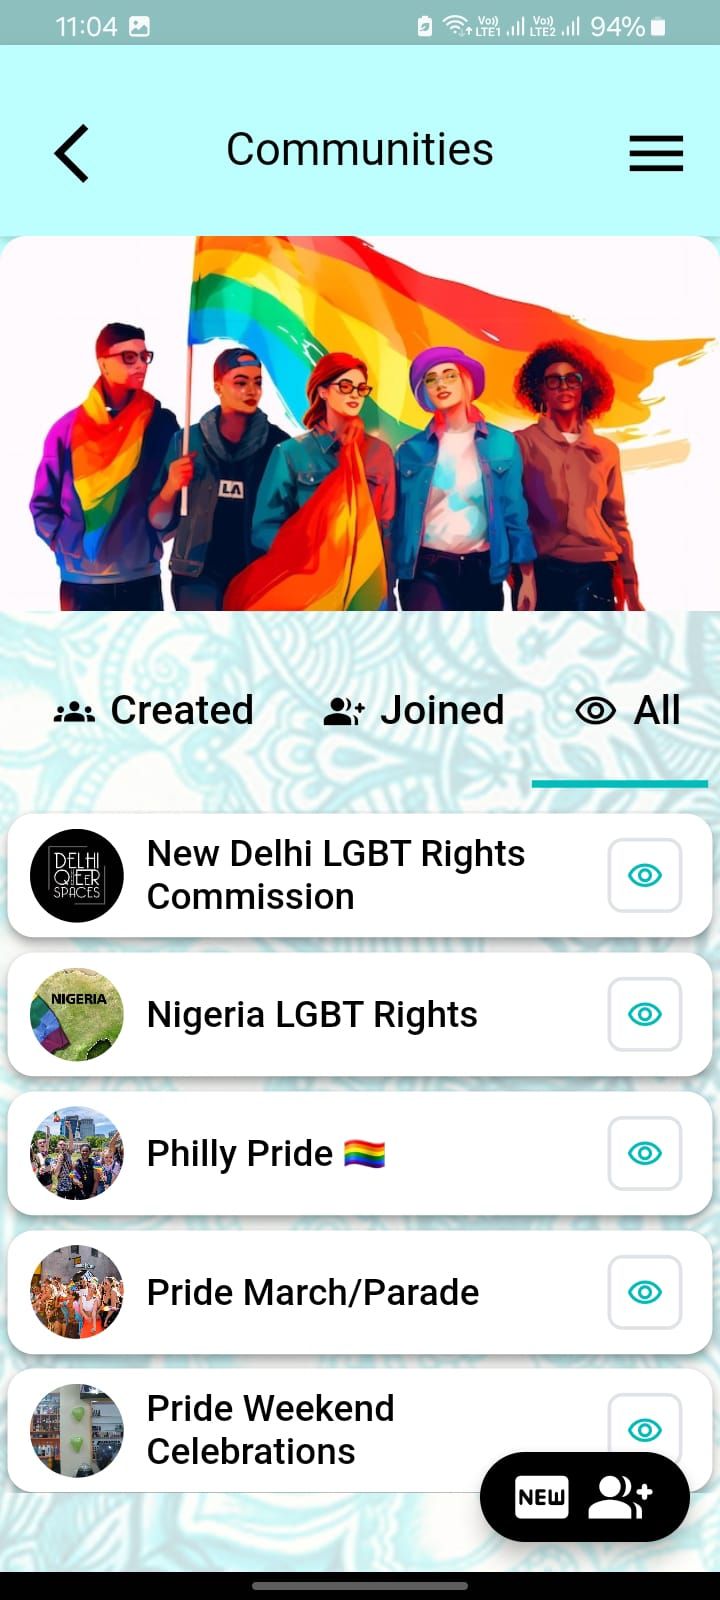 The 'Community' feature on Pride+ gives members a platform to discuss issues and news related to the community.